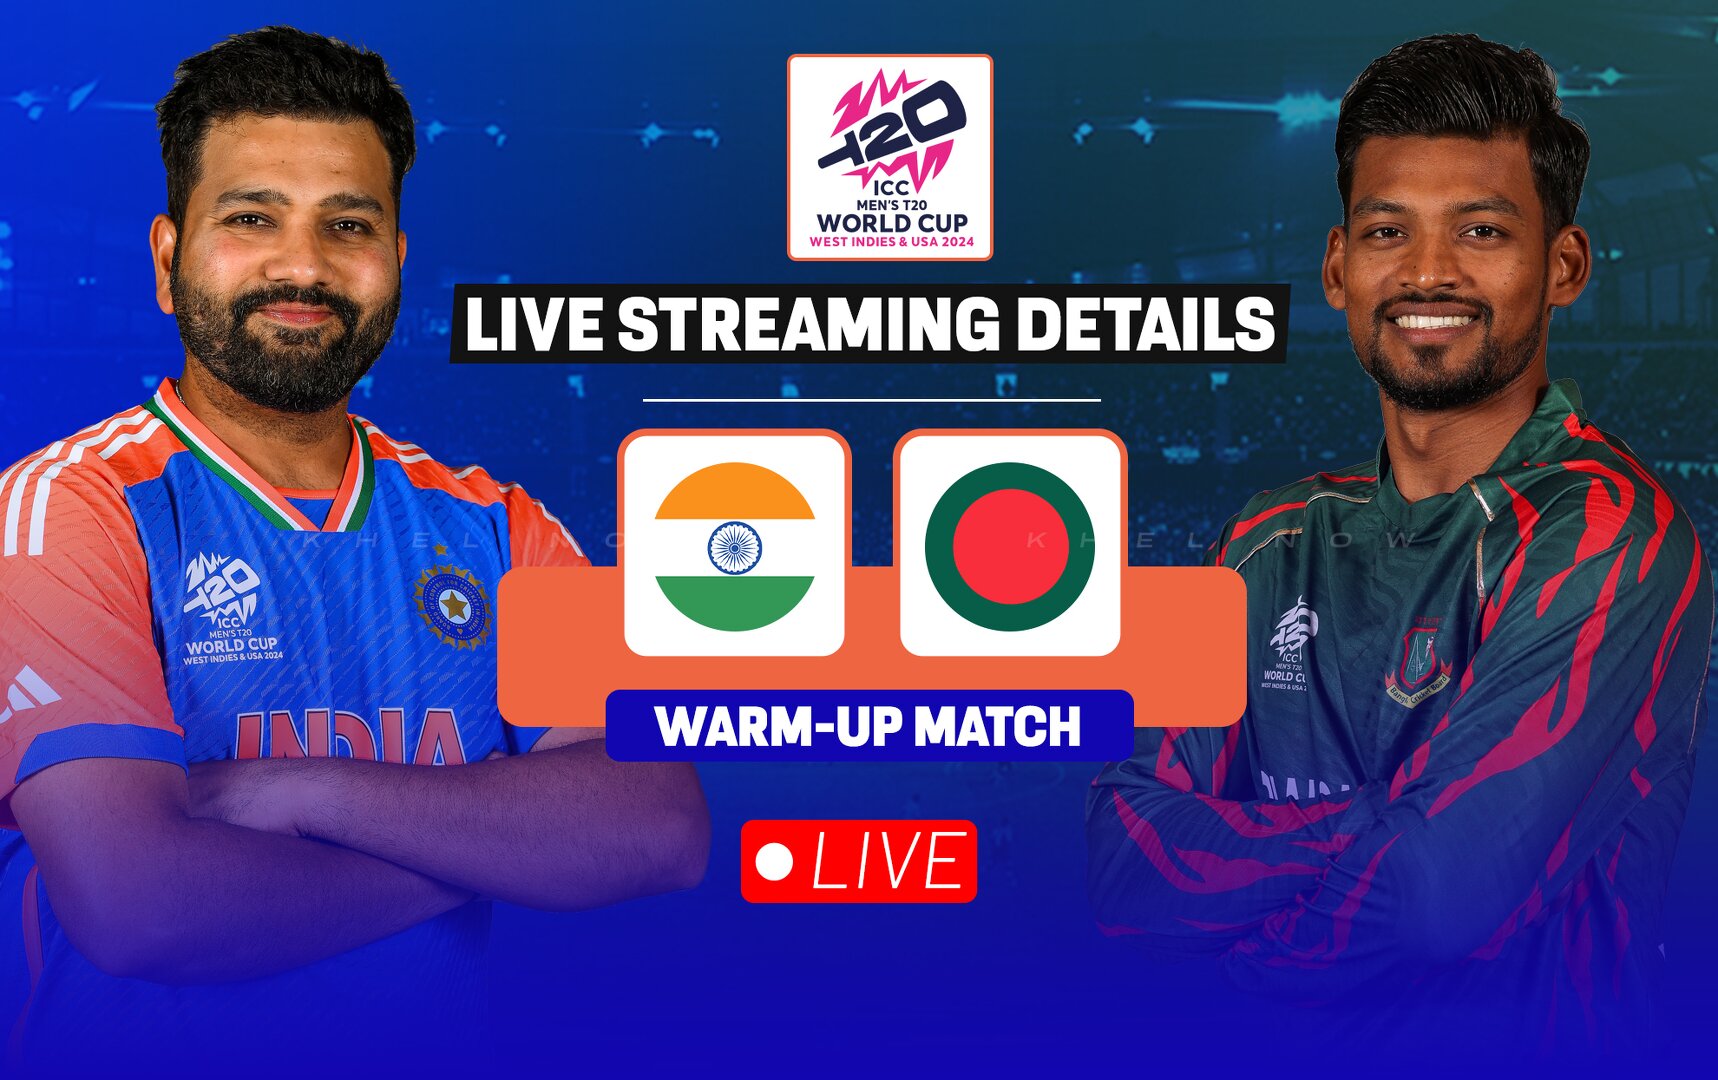 IND vs BAN Live streaming details, when and where to watch warmup